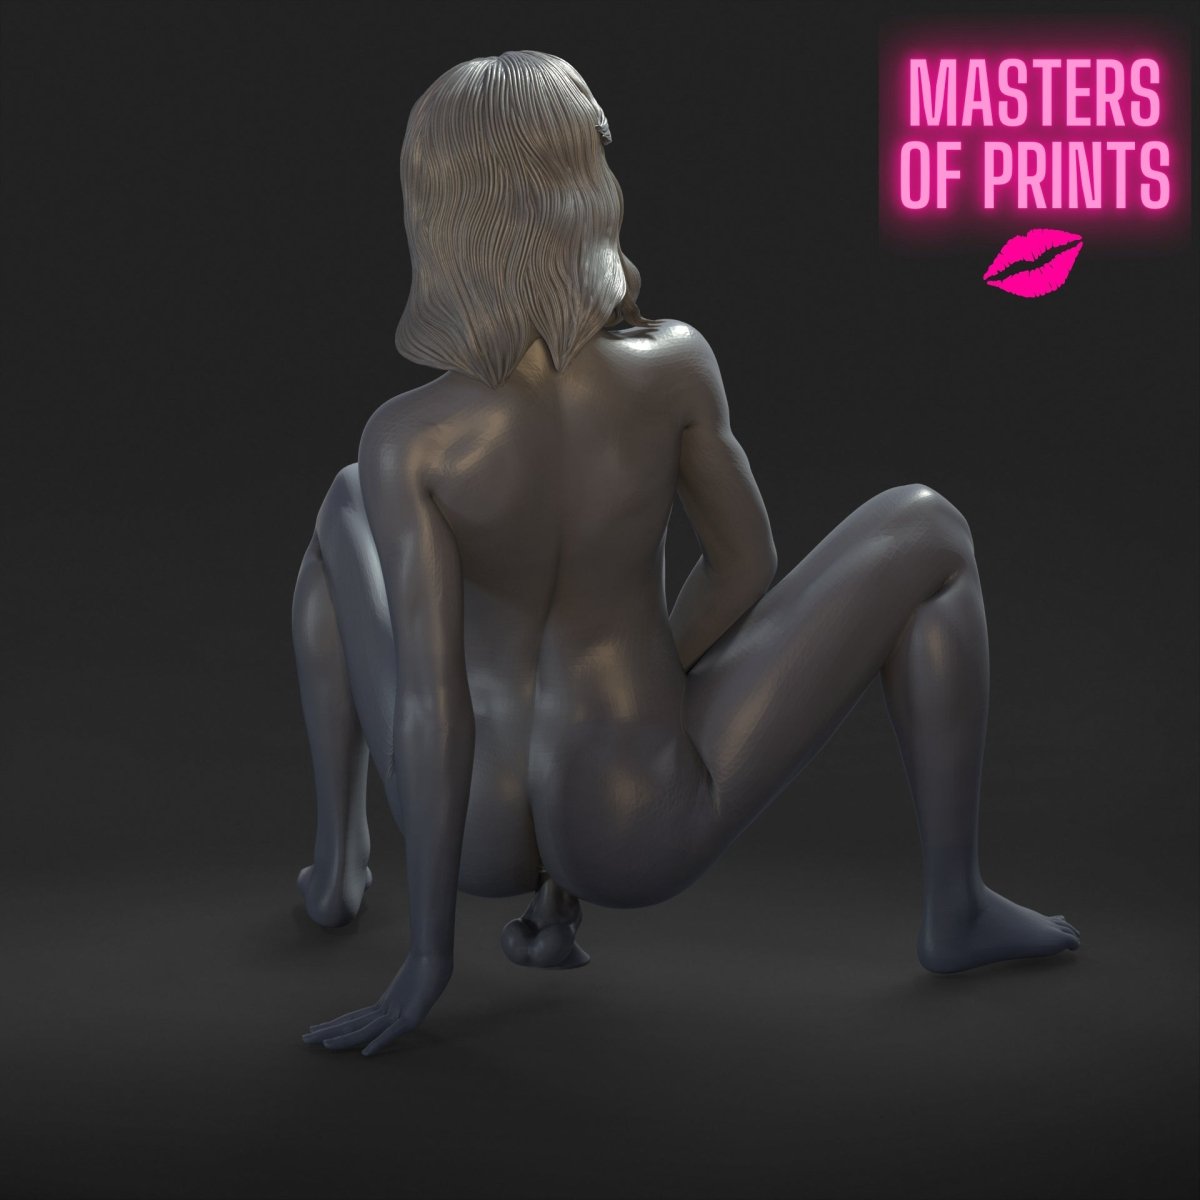 Single Dildo 12 Mature 3d Printed miniature FanArt by Masters Of Prints Collectables Statues & Figurines